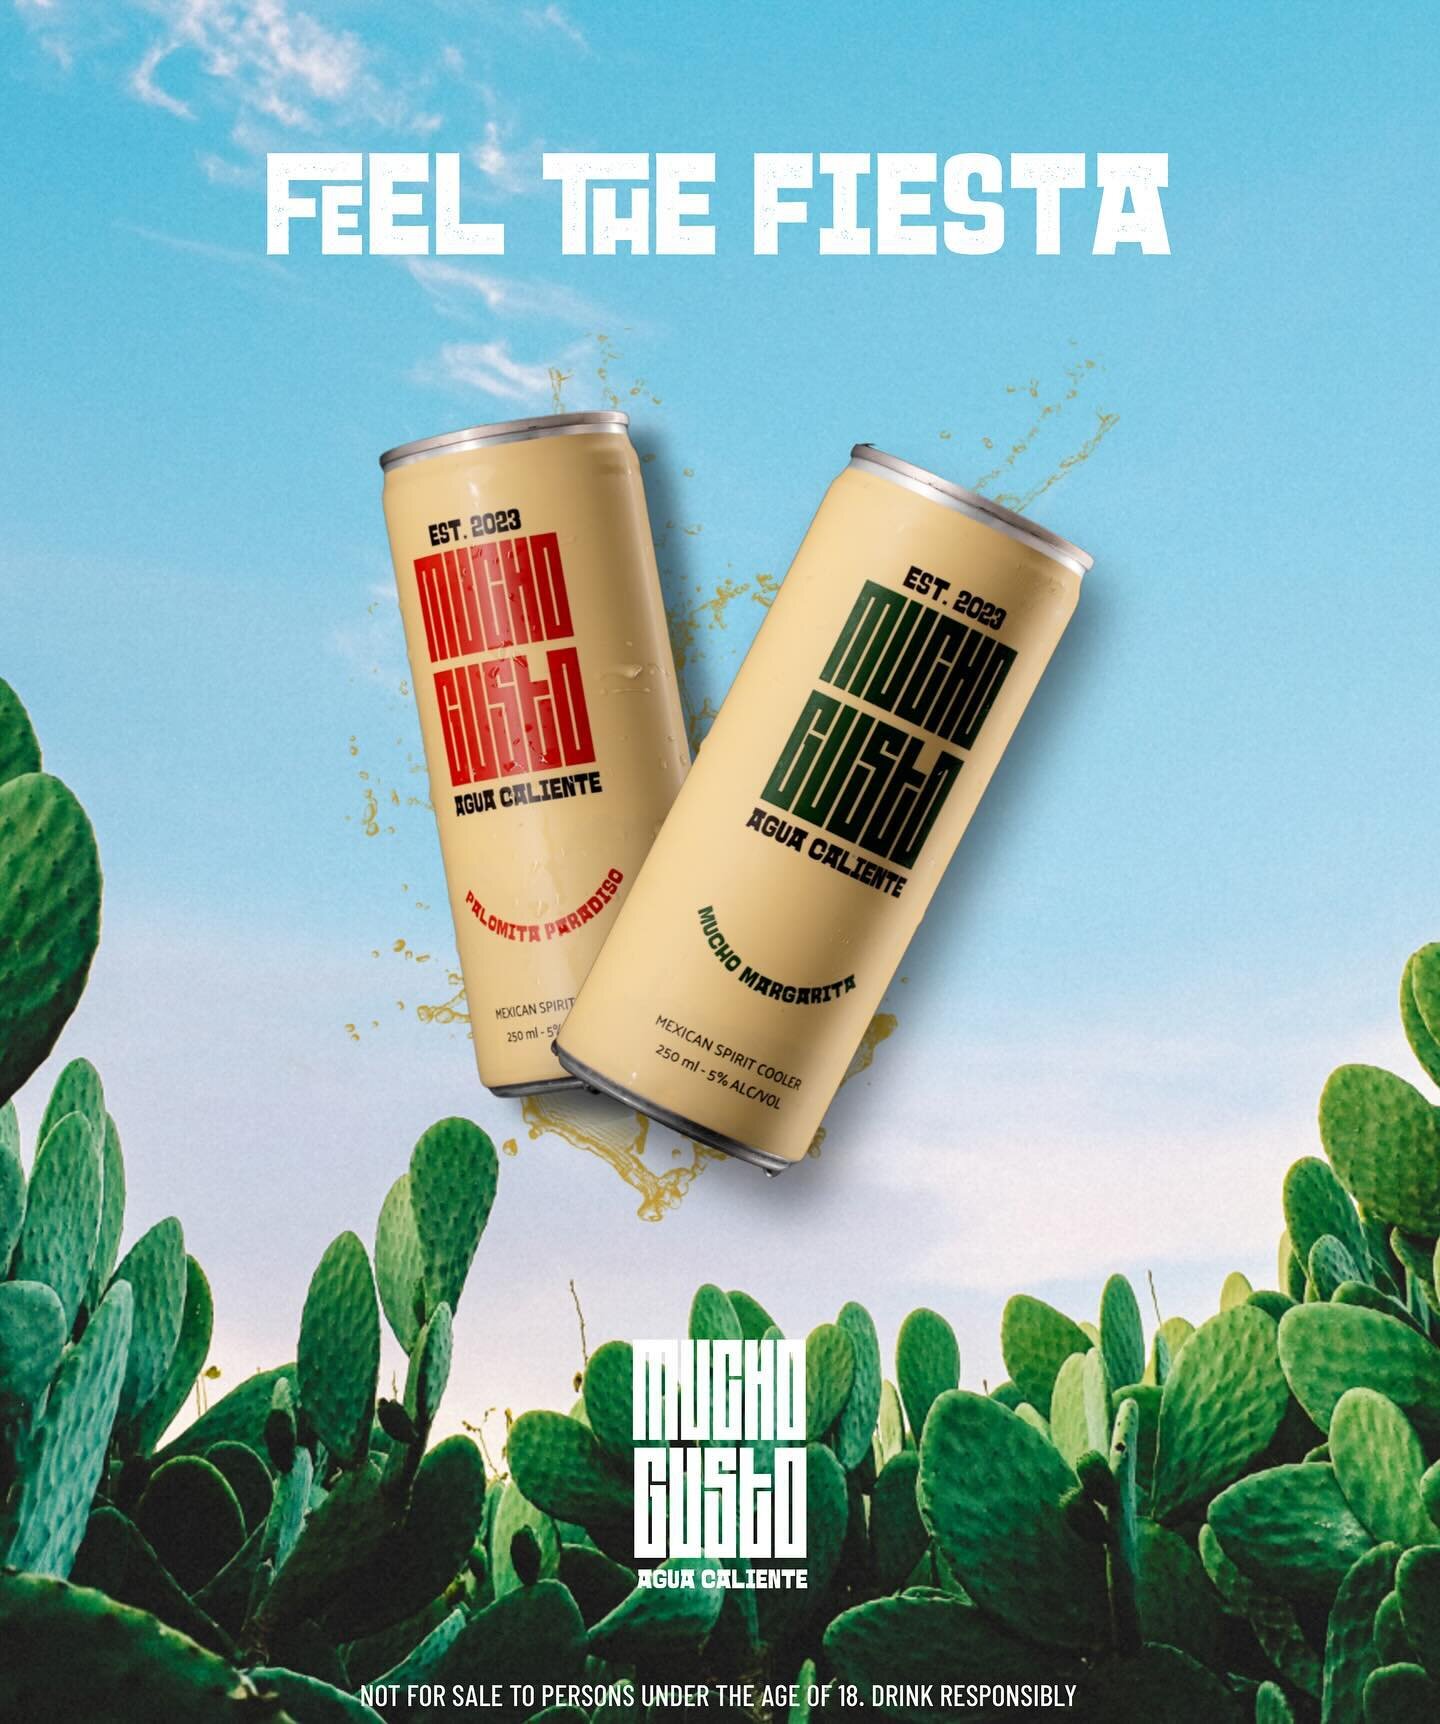 MUCHO GUSTO - AGUA CALIENTE
Convenience in a can, ensuring the Fiesta is always by your side - Wherever you may wander. 🎉🎉🎉
#FeelTheFiesta #FiestaOnTheGo

NOT FOR SALE TO PERSONS UNDER THE AGE OF 18. DRINK RESPONSIBLY